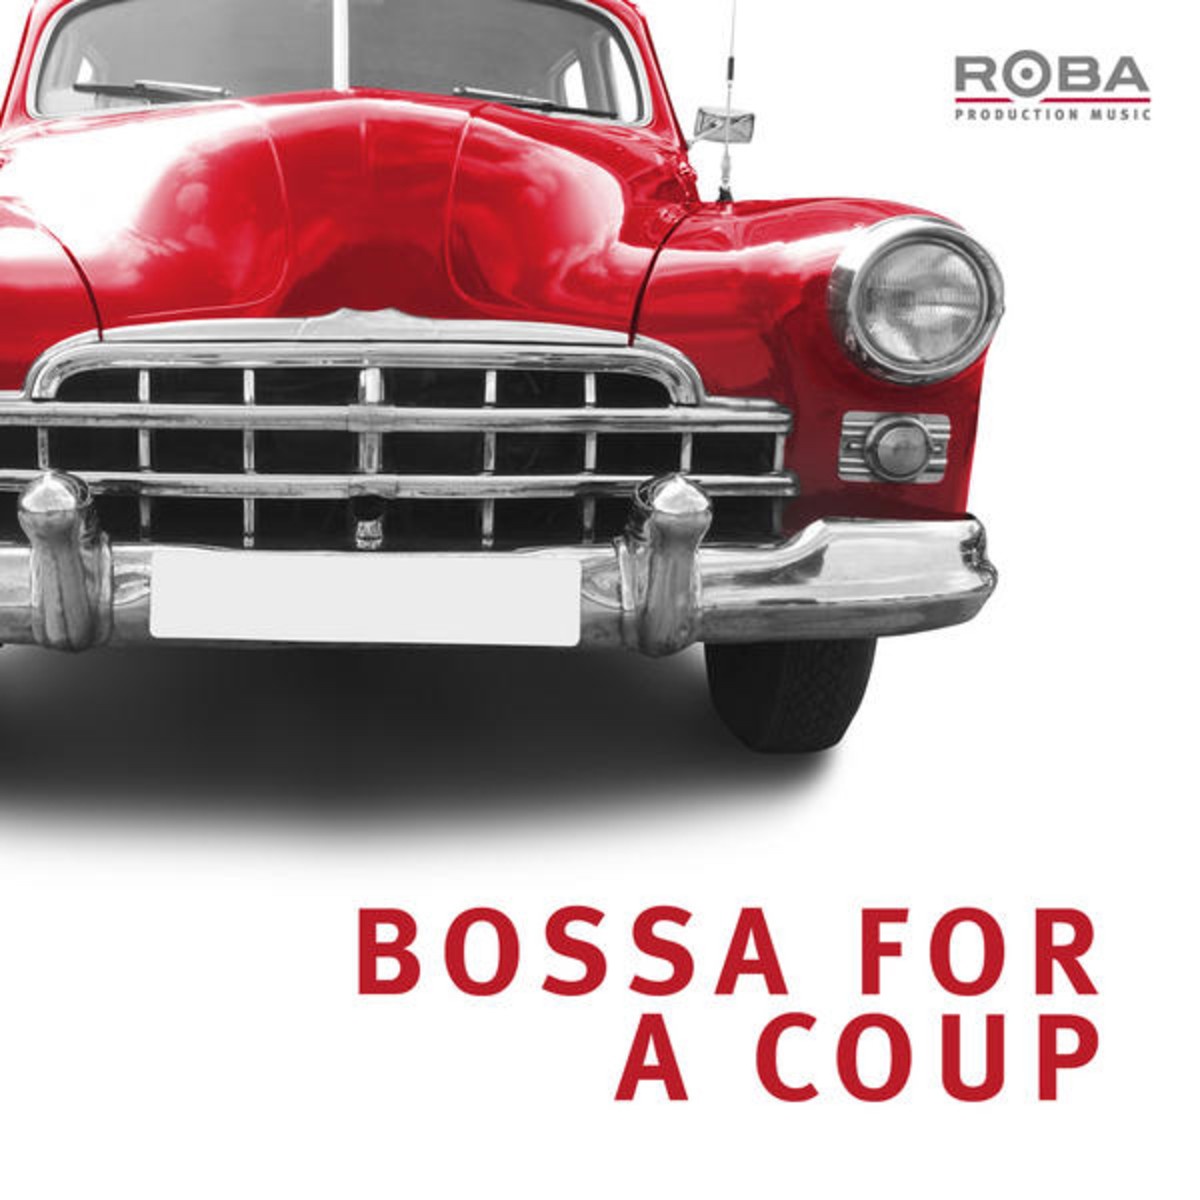 Bossa for a Coup